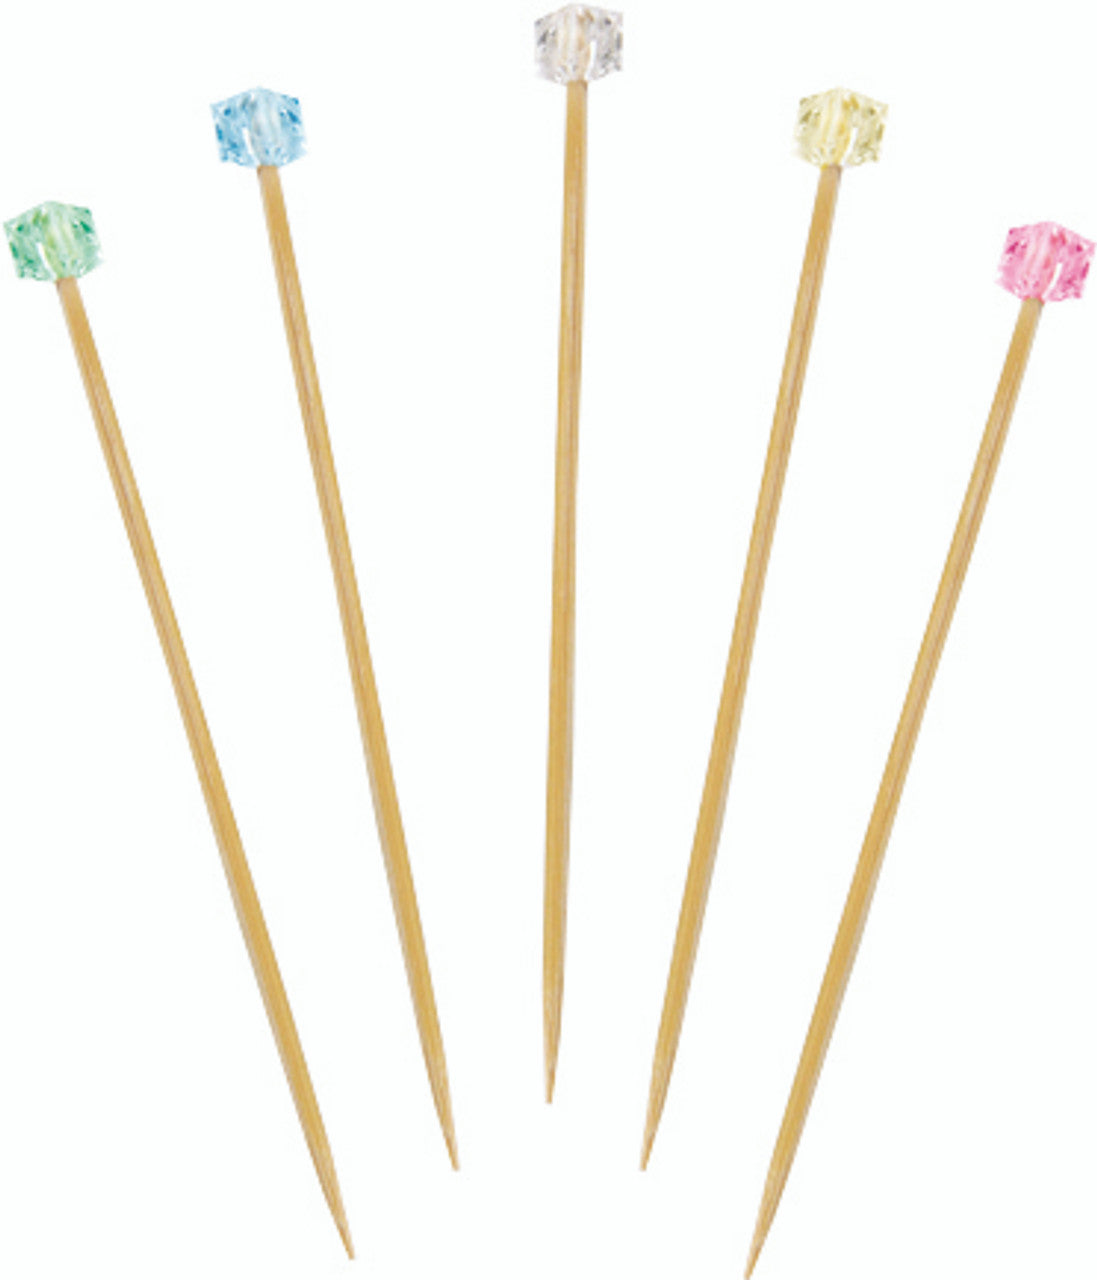 Lady cube bamboo skewer 4.7"